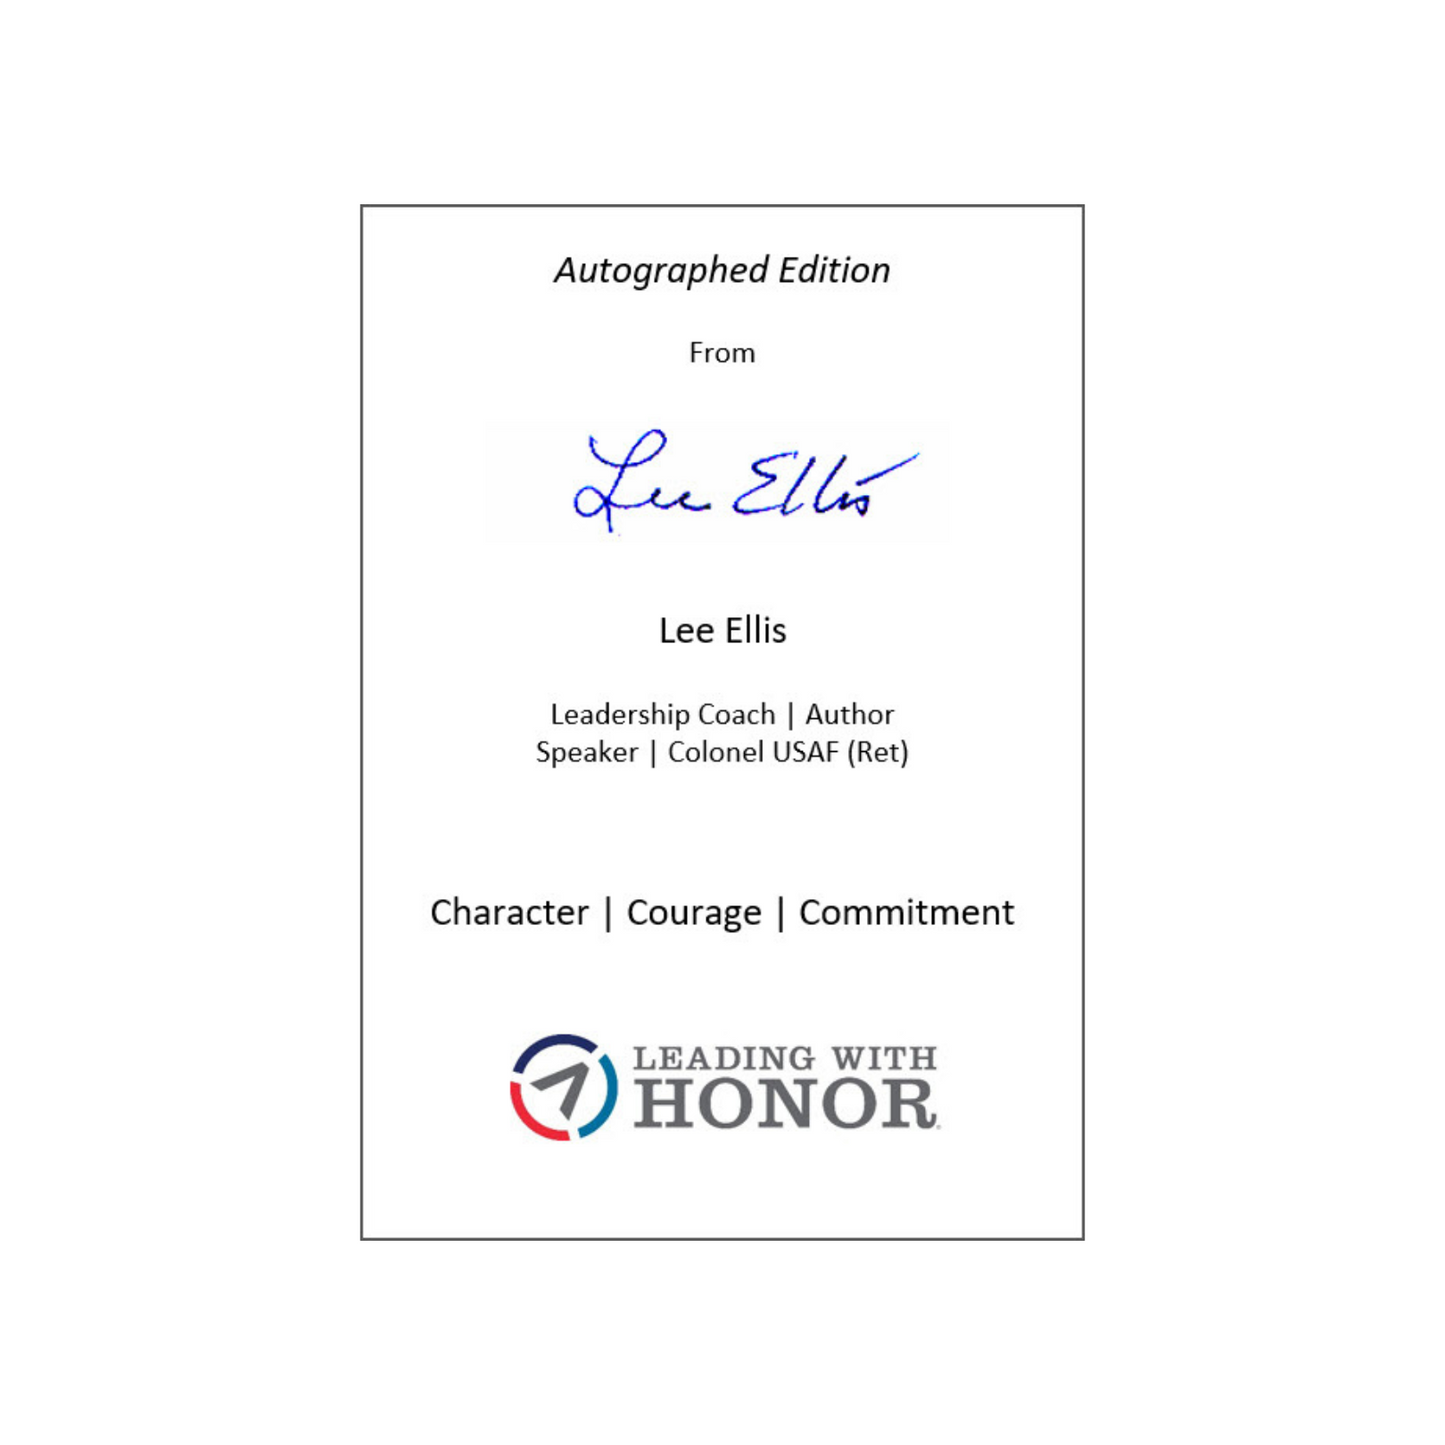 Leading with Honor: Leadership Lessons from the Hanoi Hilton by Lee Ellis, Autographed Edition